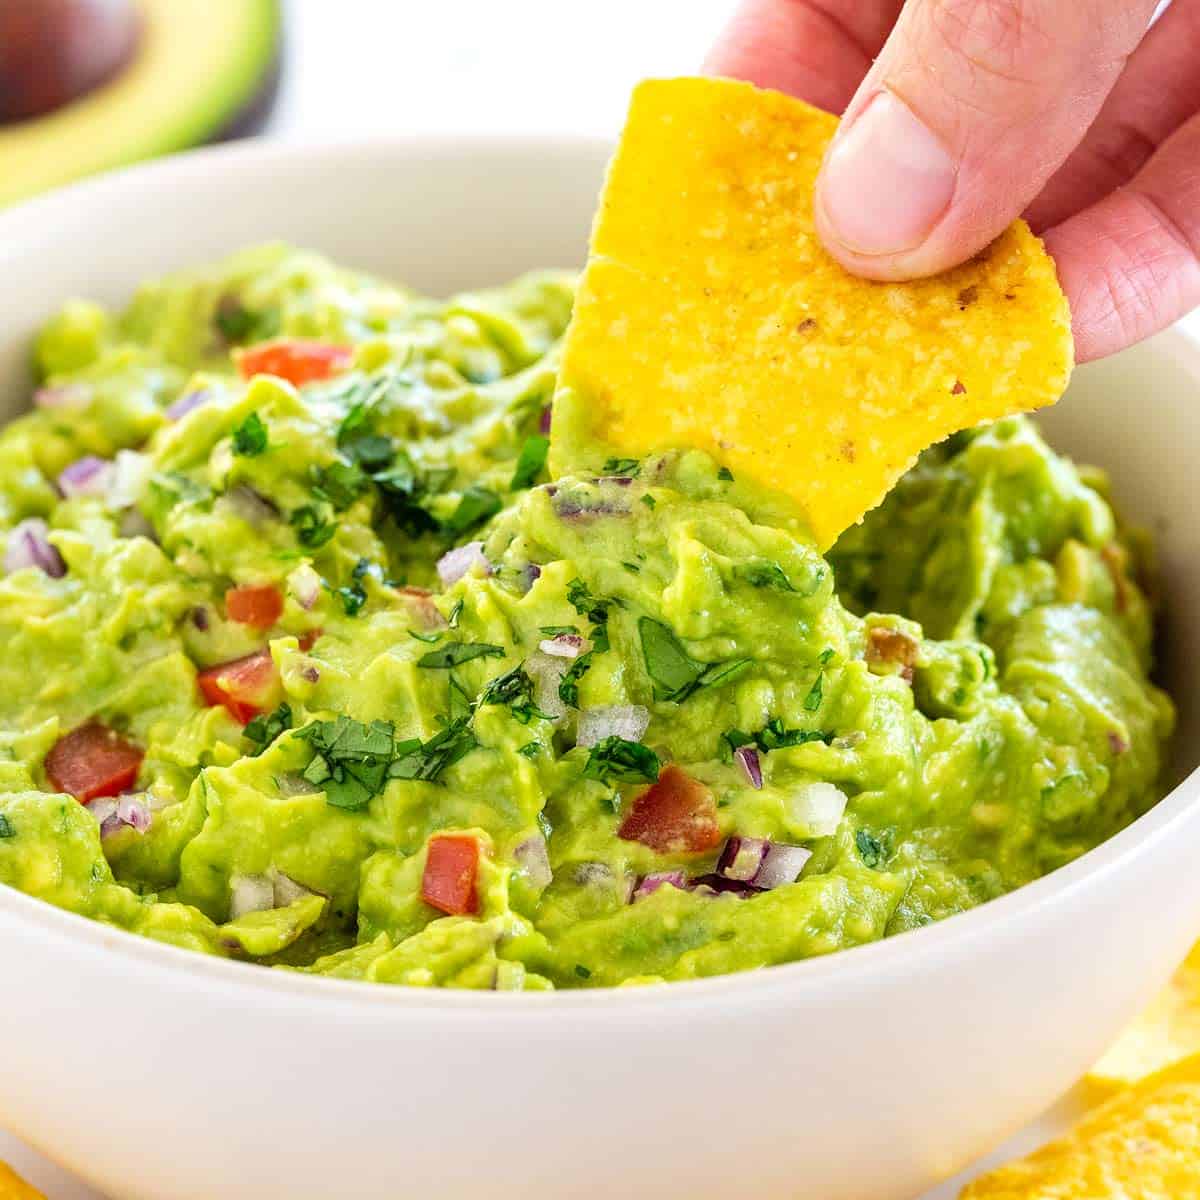 Guacamole Market Research Report: Global Industry Overview & Outlook (2019-2024) - IMARCGroup